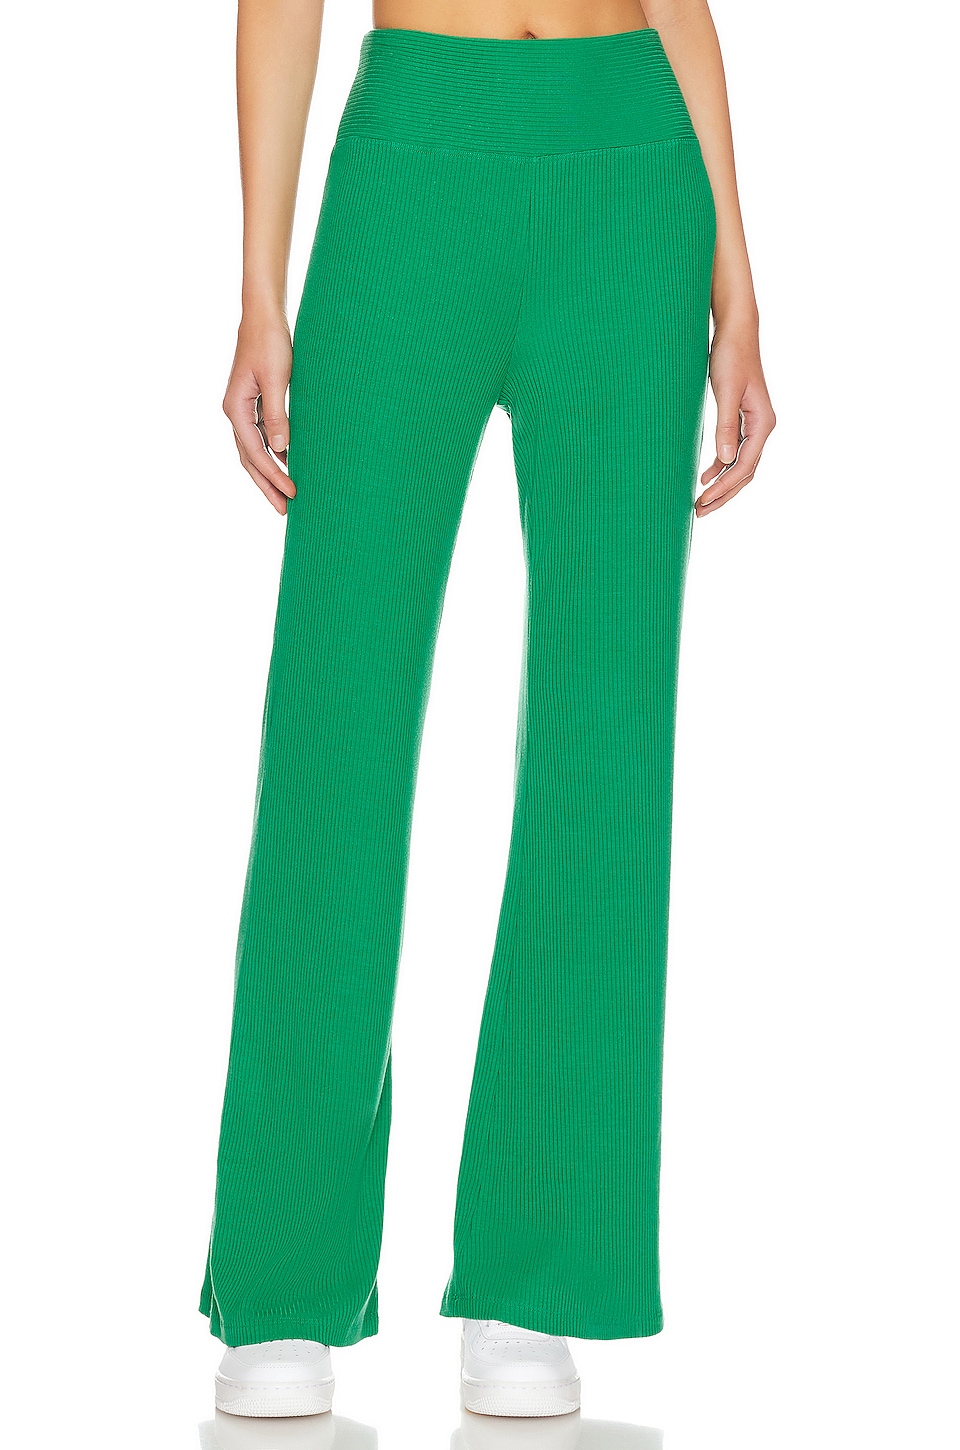 Perfect Moment Aurora Flare Pant in Pear Green